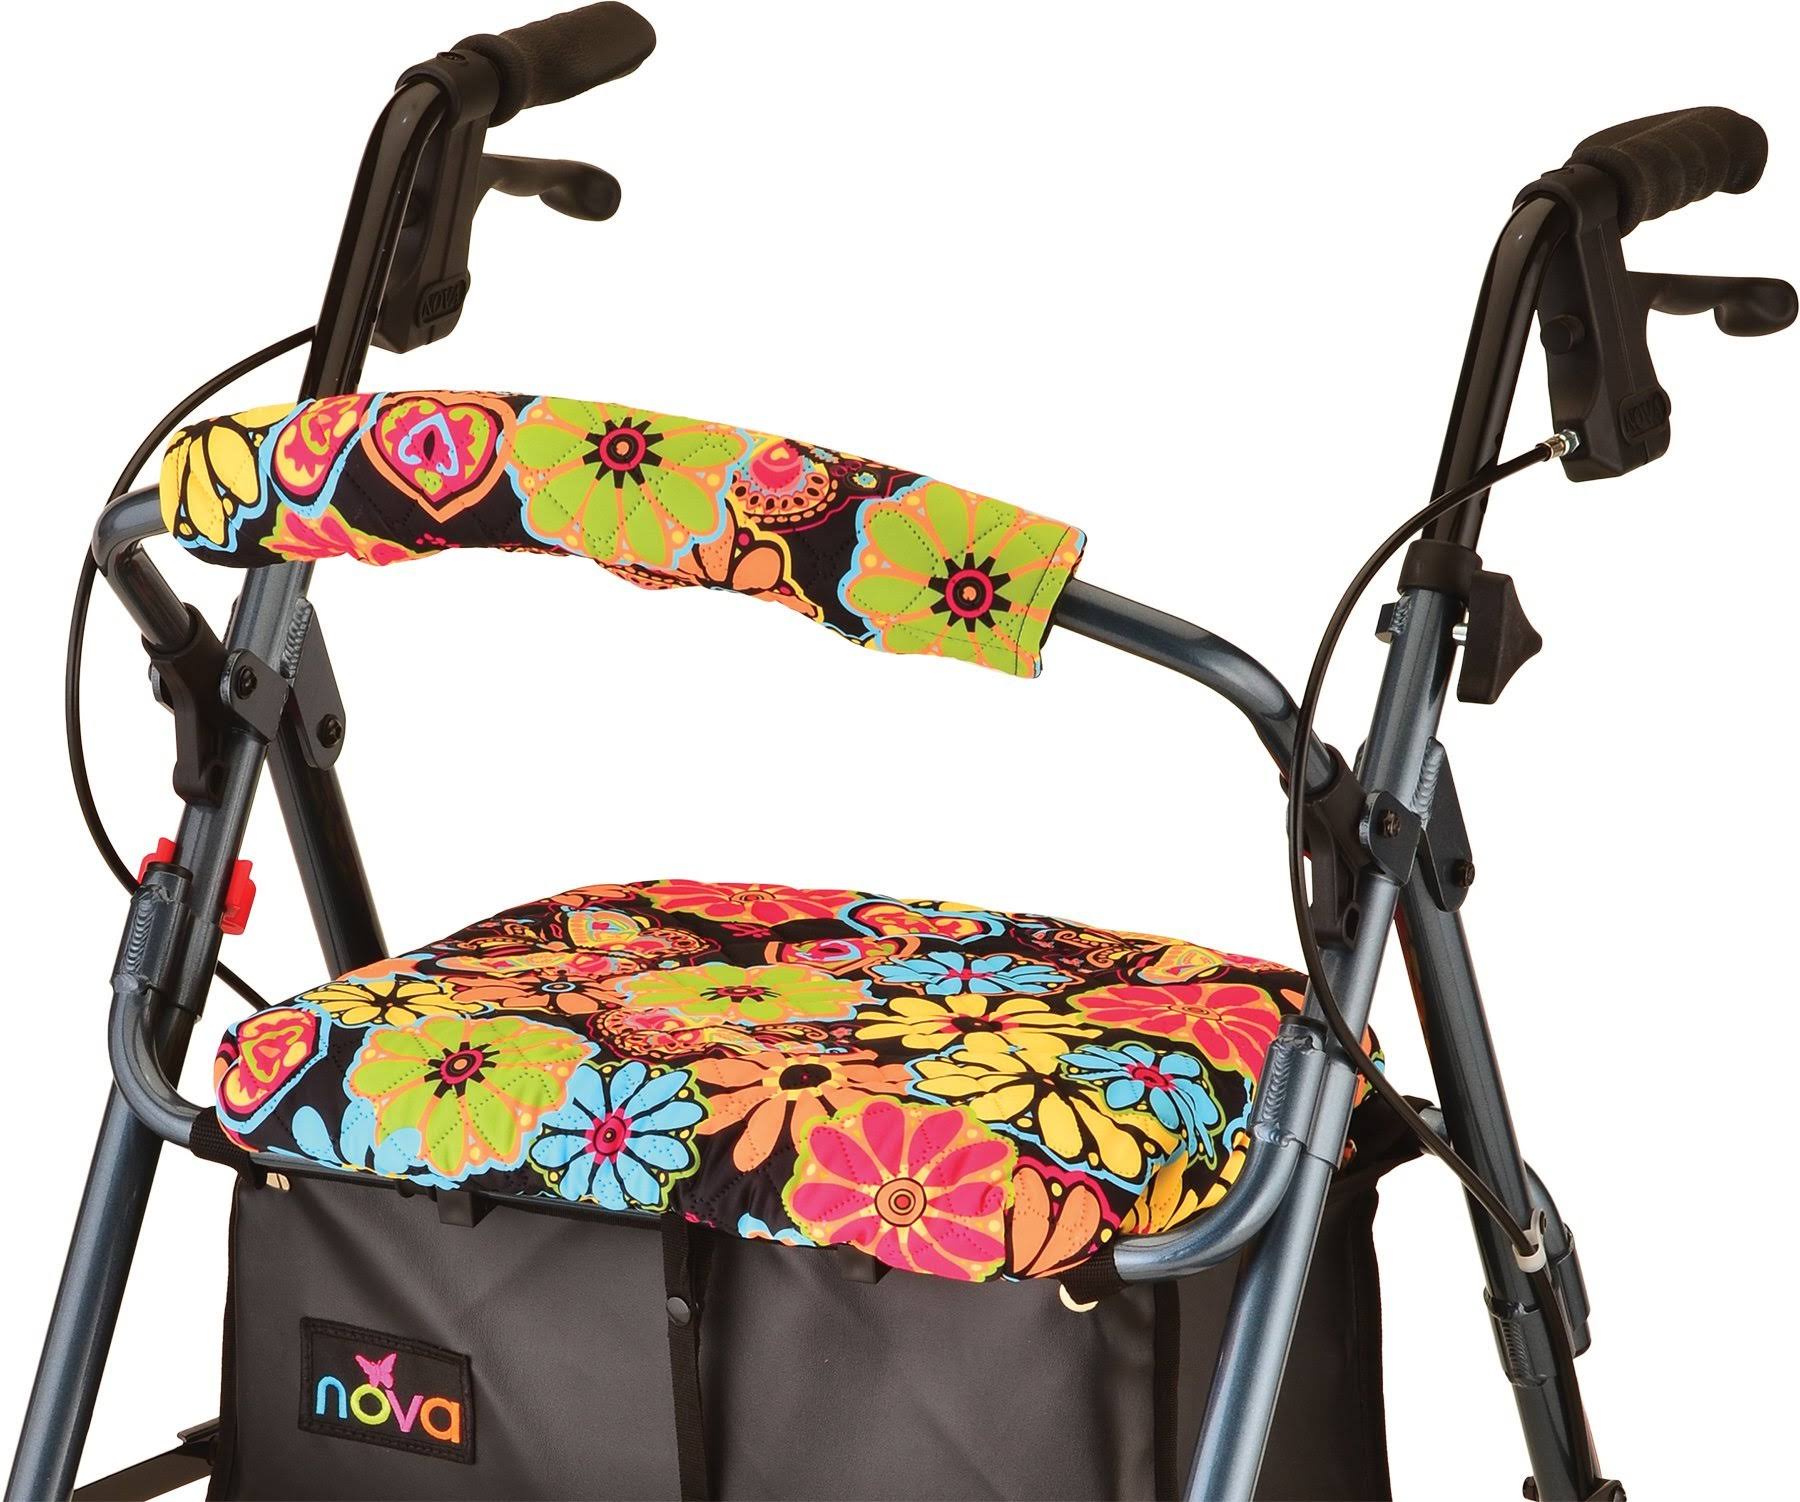 Nova Medical Products Seat and Back Cover - Boho Blossoms